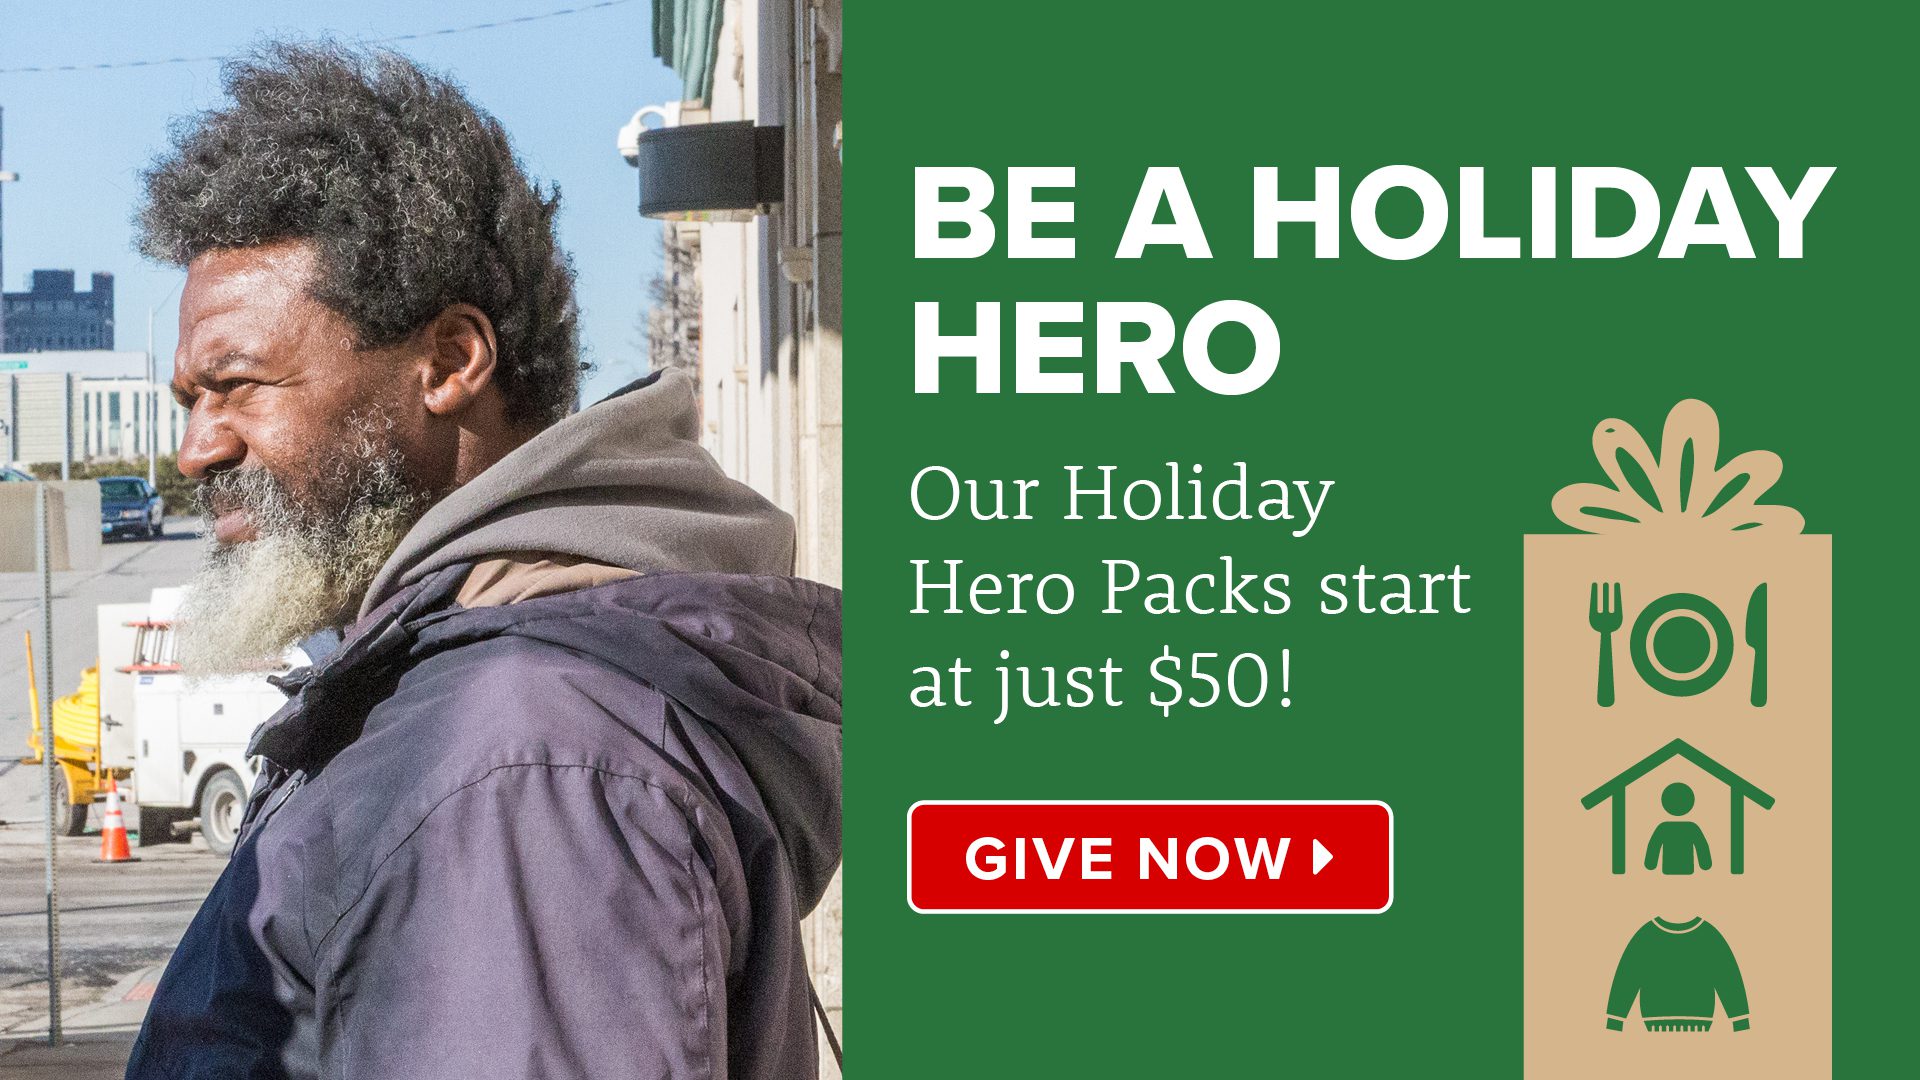 Be a holiday hero this Christmas